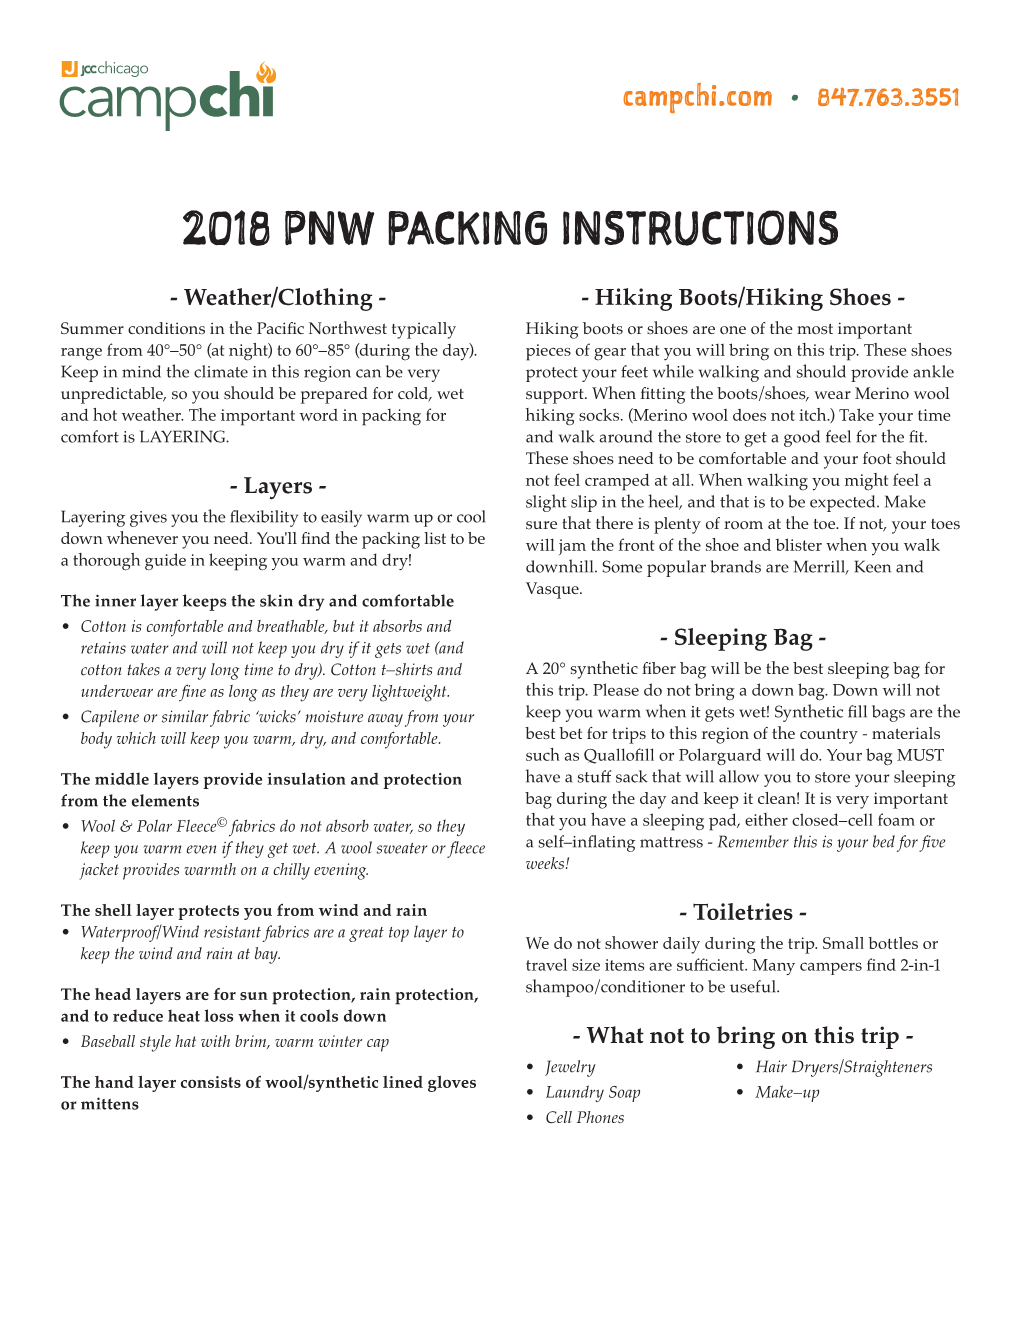 2018 Pnw Packing Instructions